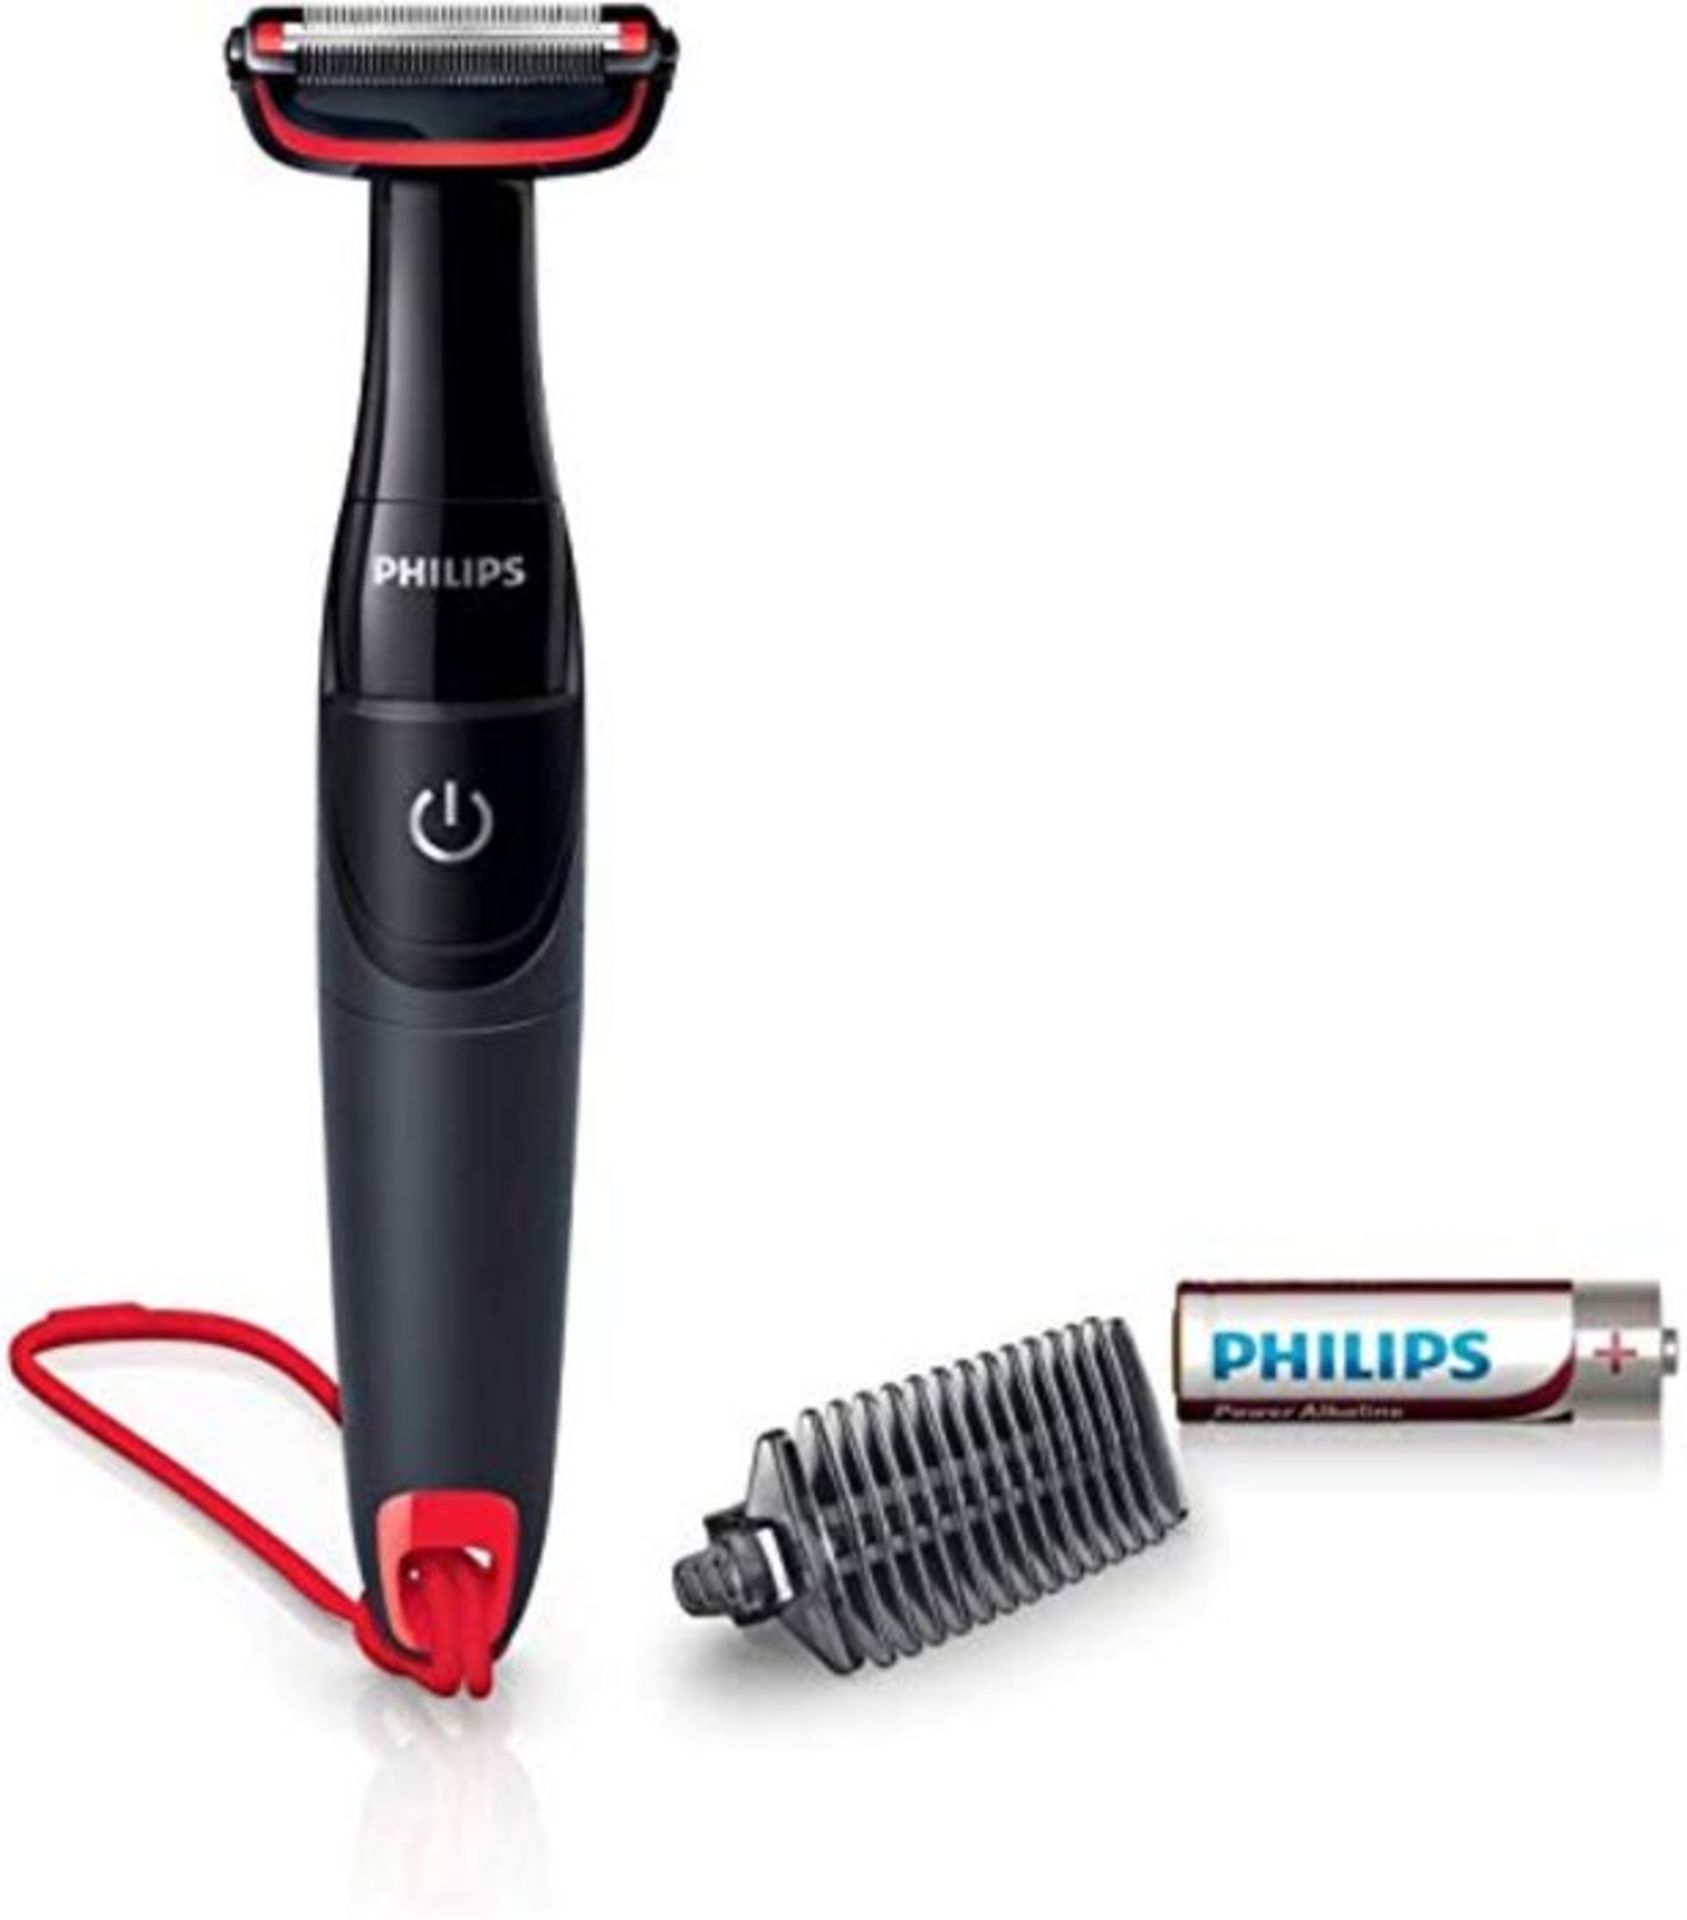 Philips Body Groomer, Series 1000 with Skin Protector Guards, Battery-Operated - BG105